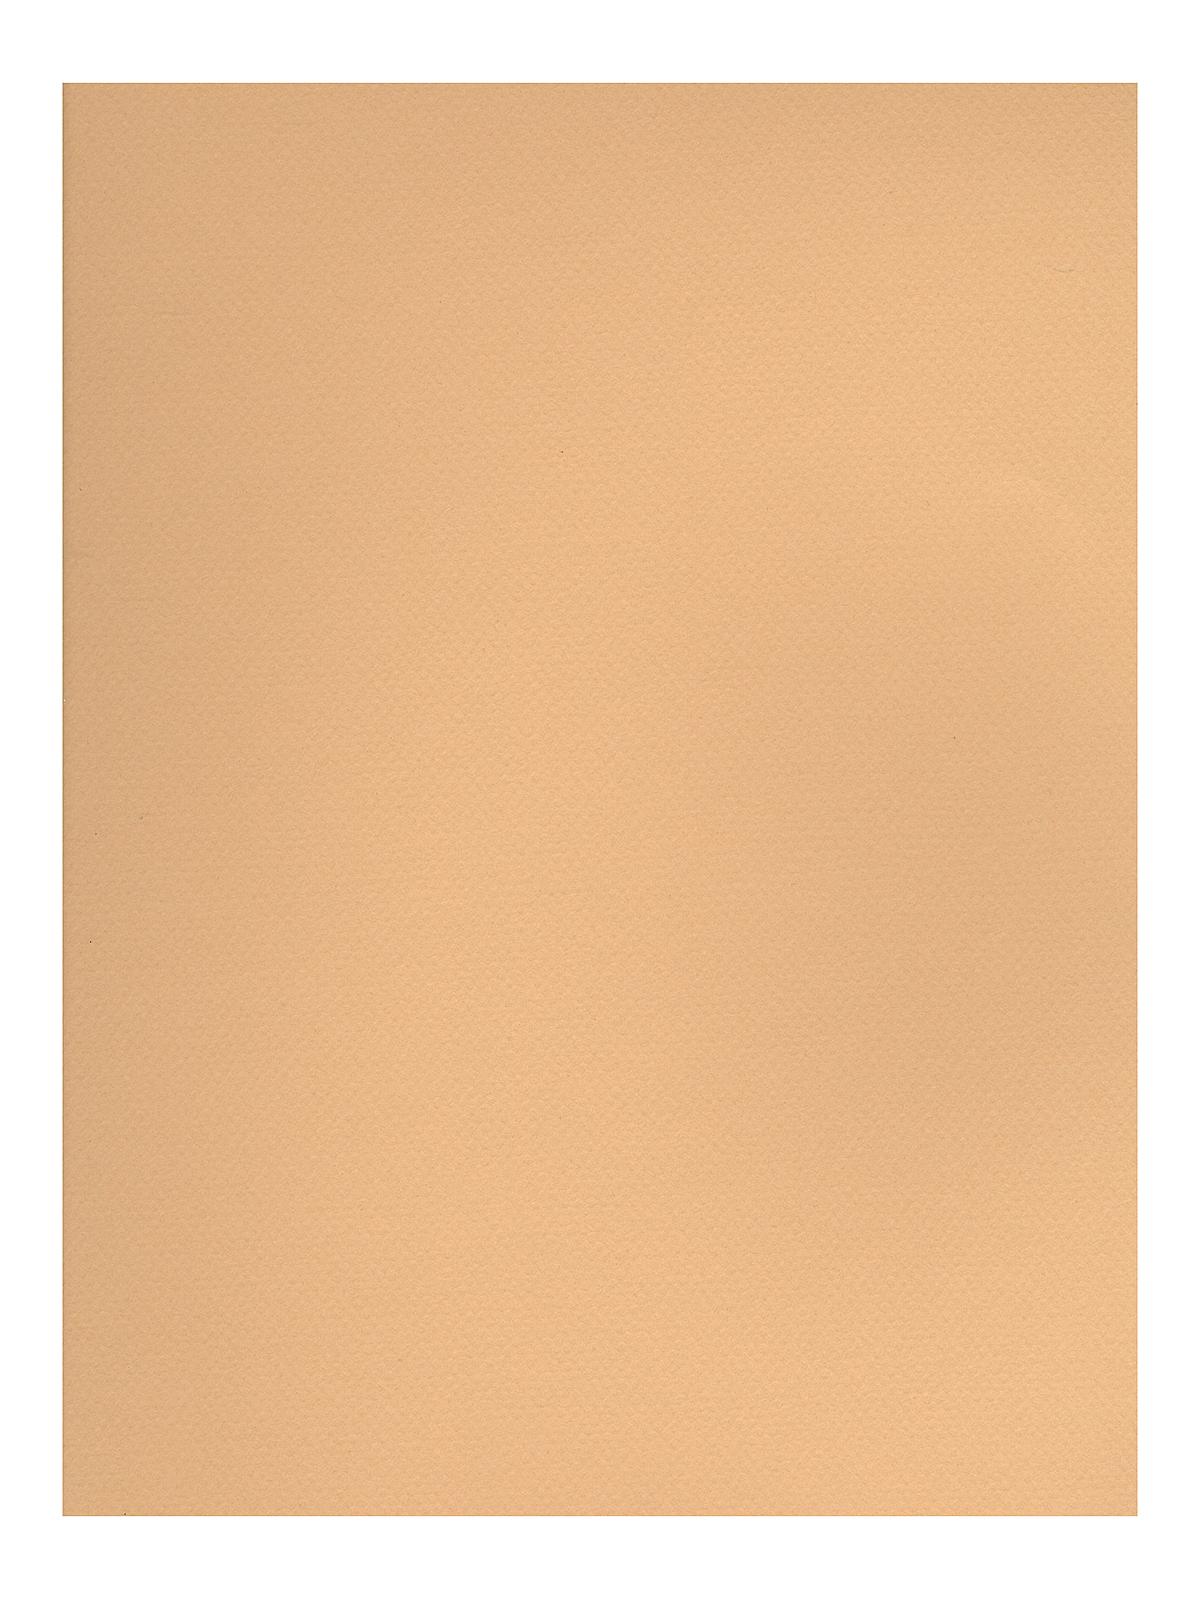 Mi-teintes Tinted Paper Champagne 19 In. X 25 In.